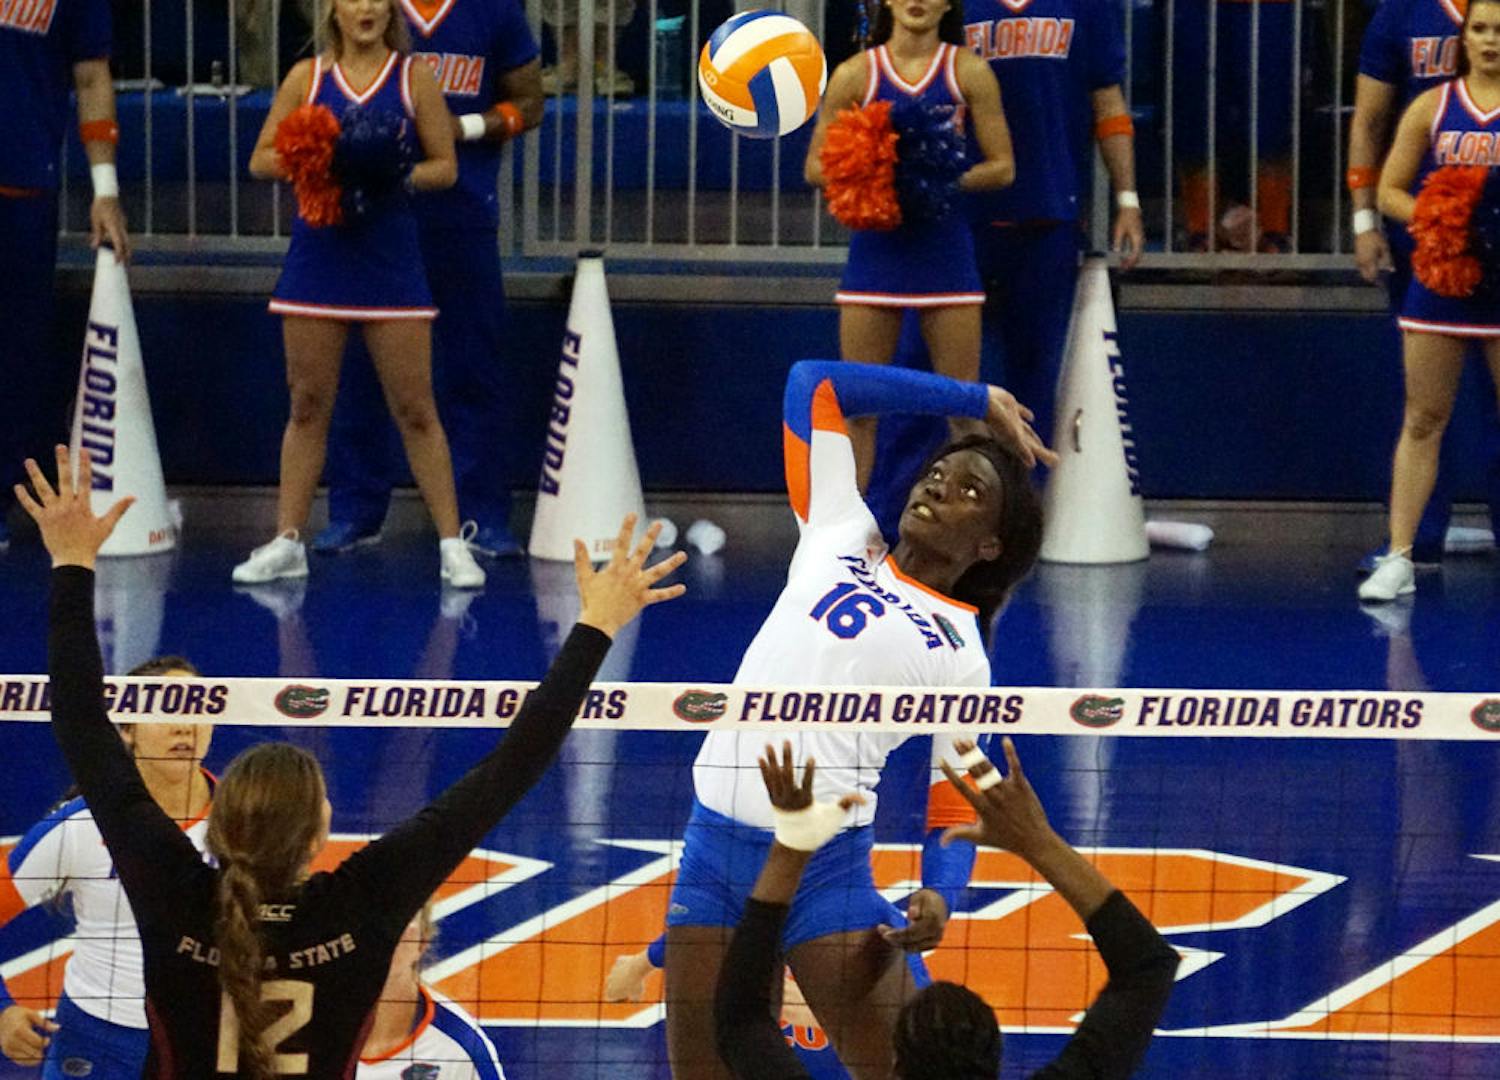 UF middle blocker Simone Antwi swings for a kill attempt during Florida's 3-1 win against Florida State on Sept. 20, 2015, in the O'Connell Center.